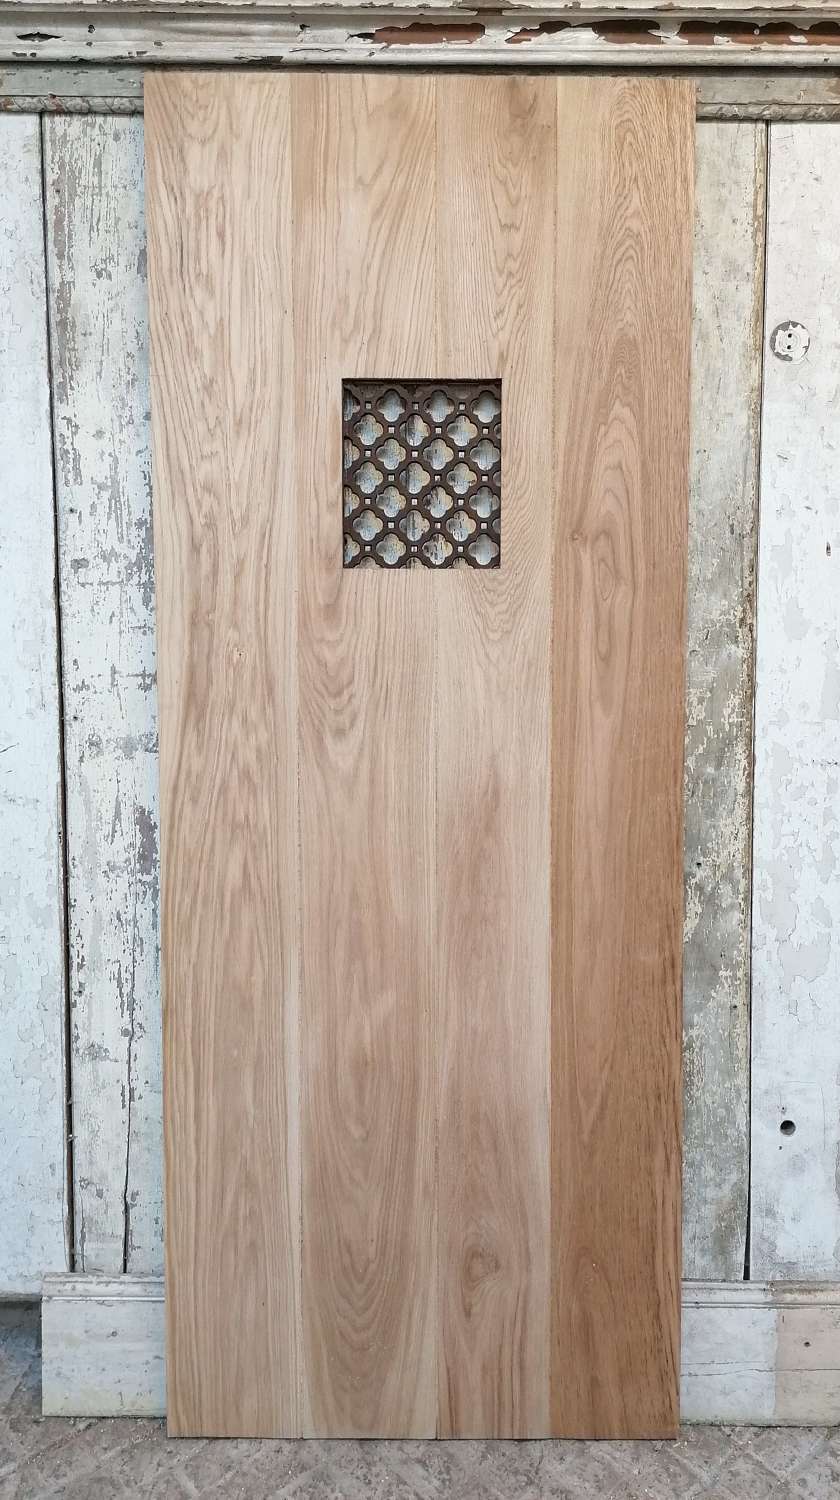 DI0758 RECLAIMED OAK PLANK COTTAGE INTERNAL DOOR WITH CAST IRON GRILL